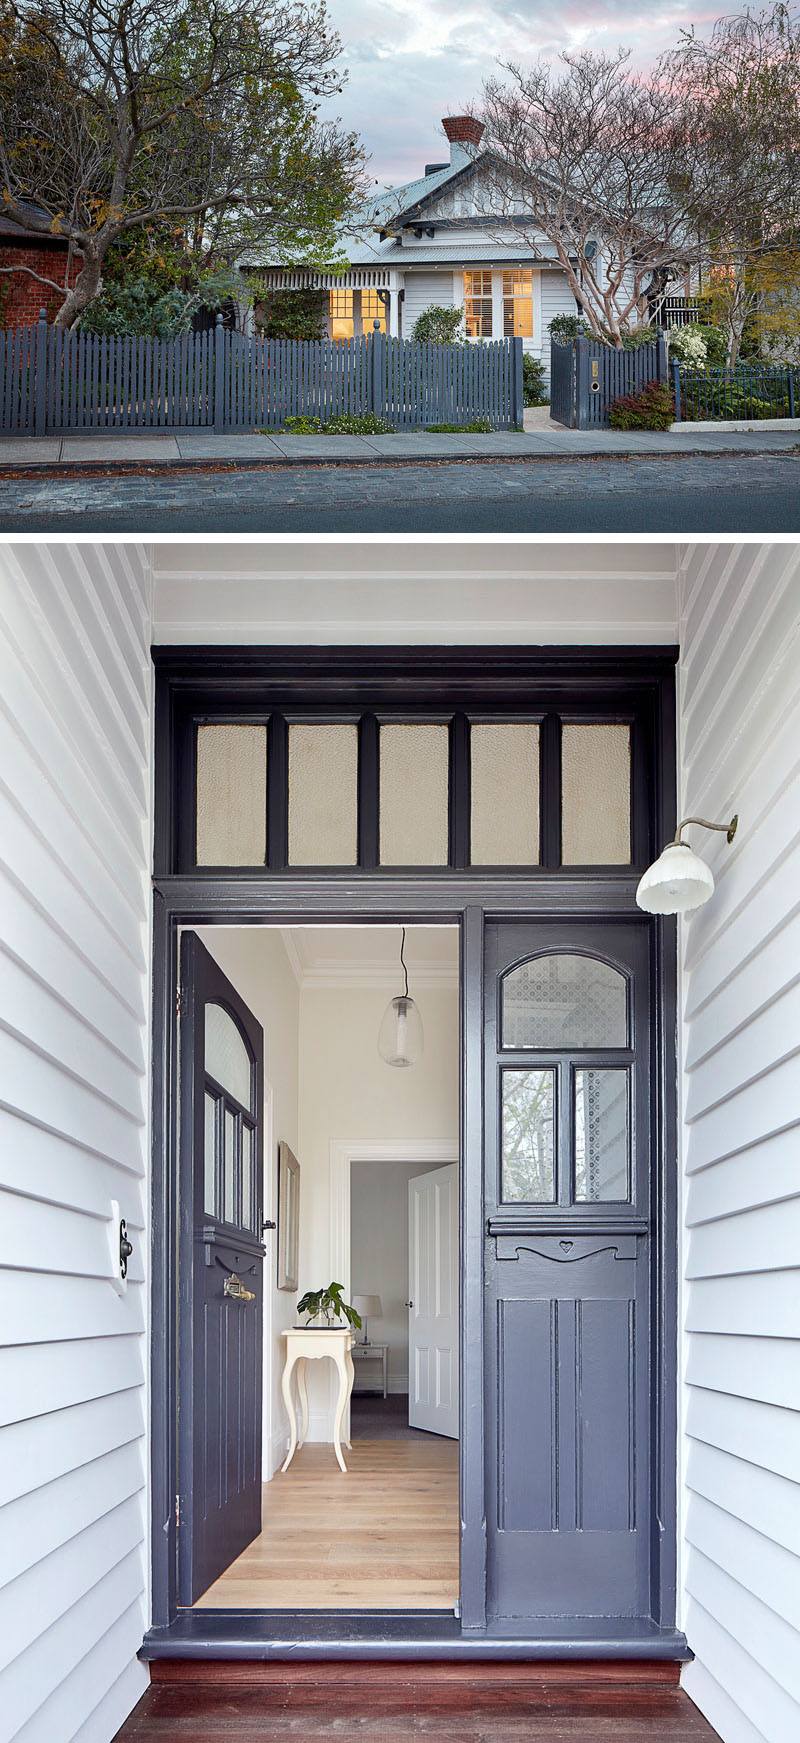 Architecture and interior design firm Bryant Alsop, has given new life to an Edwardian character house in Melbourne, Australia, for their clients who wanted a contemporary family home, that was open-plan and flowed, but retained distinct living areas as was characteristic of the older house. #HouseDesign #FrontDoor